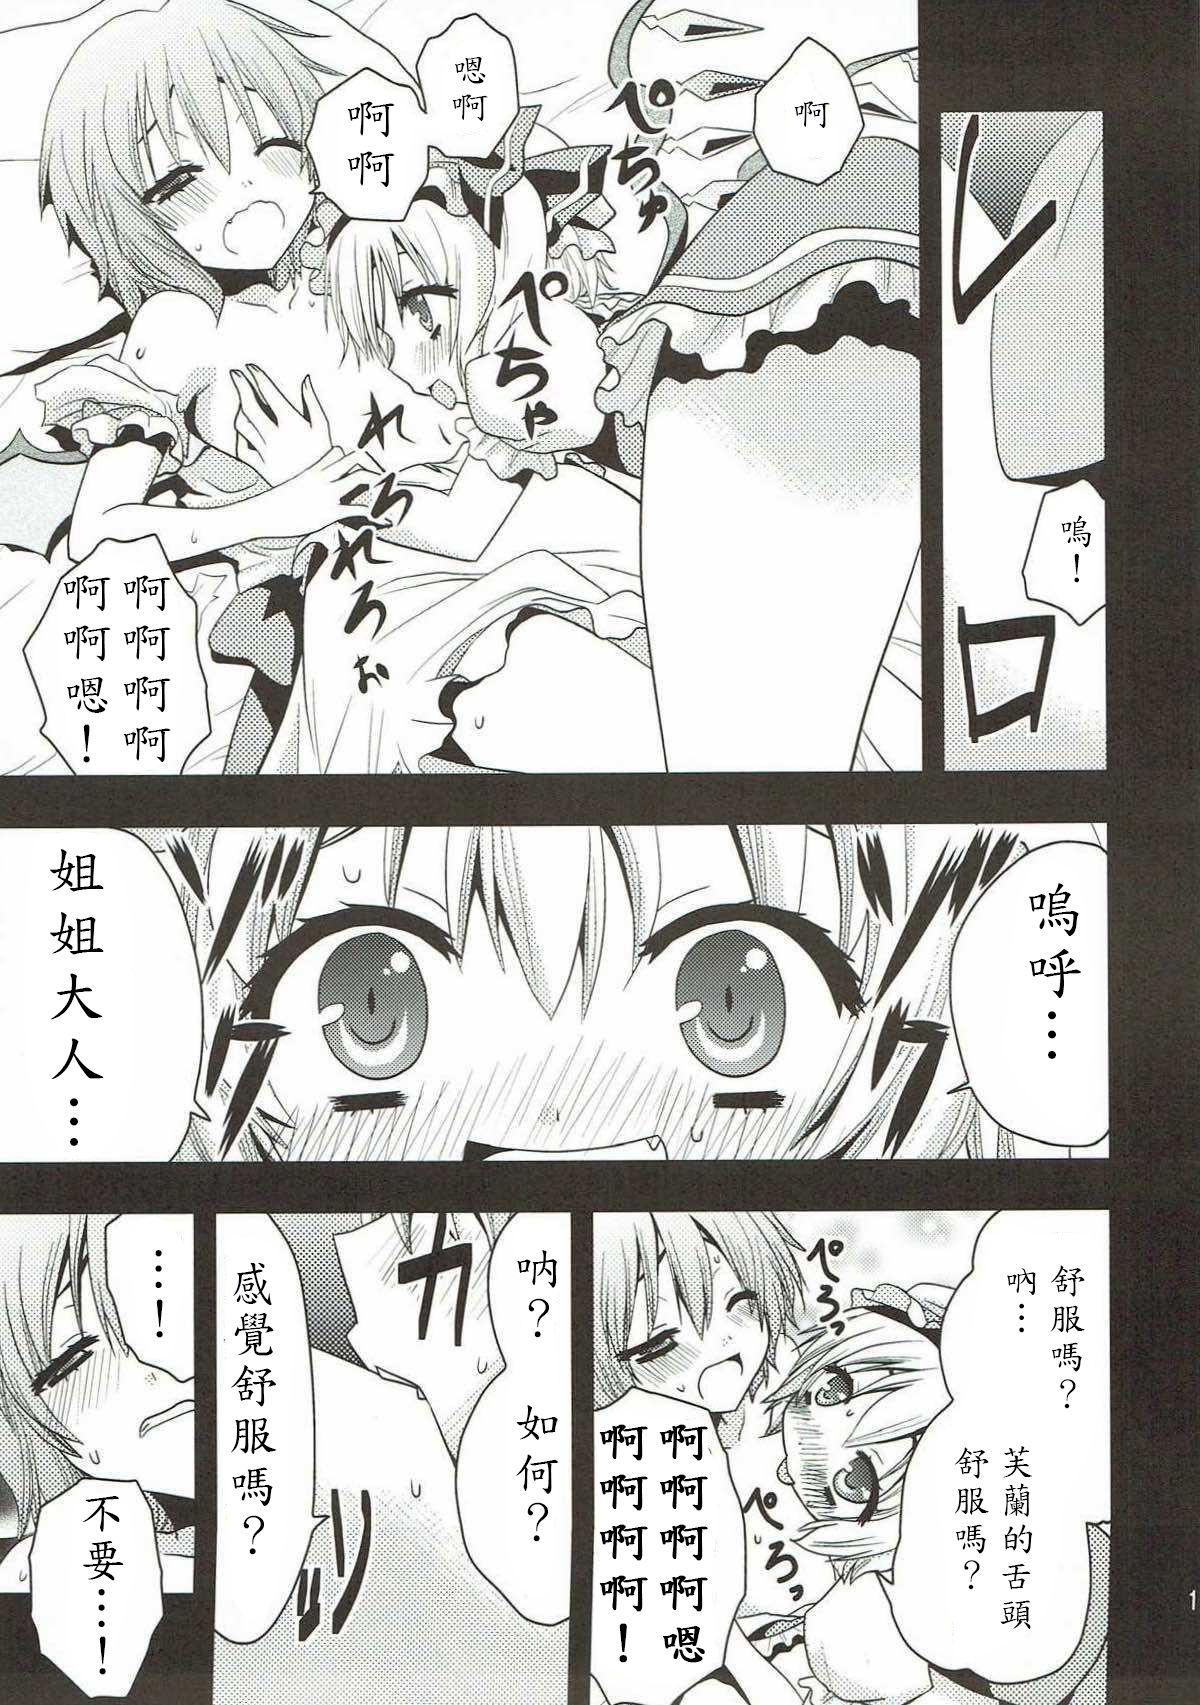 White Chick Aishiteru Aishiteru Aishiteru - Touhou project Cunt - Page 12